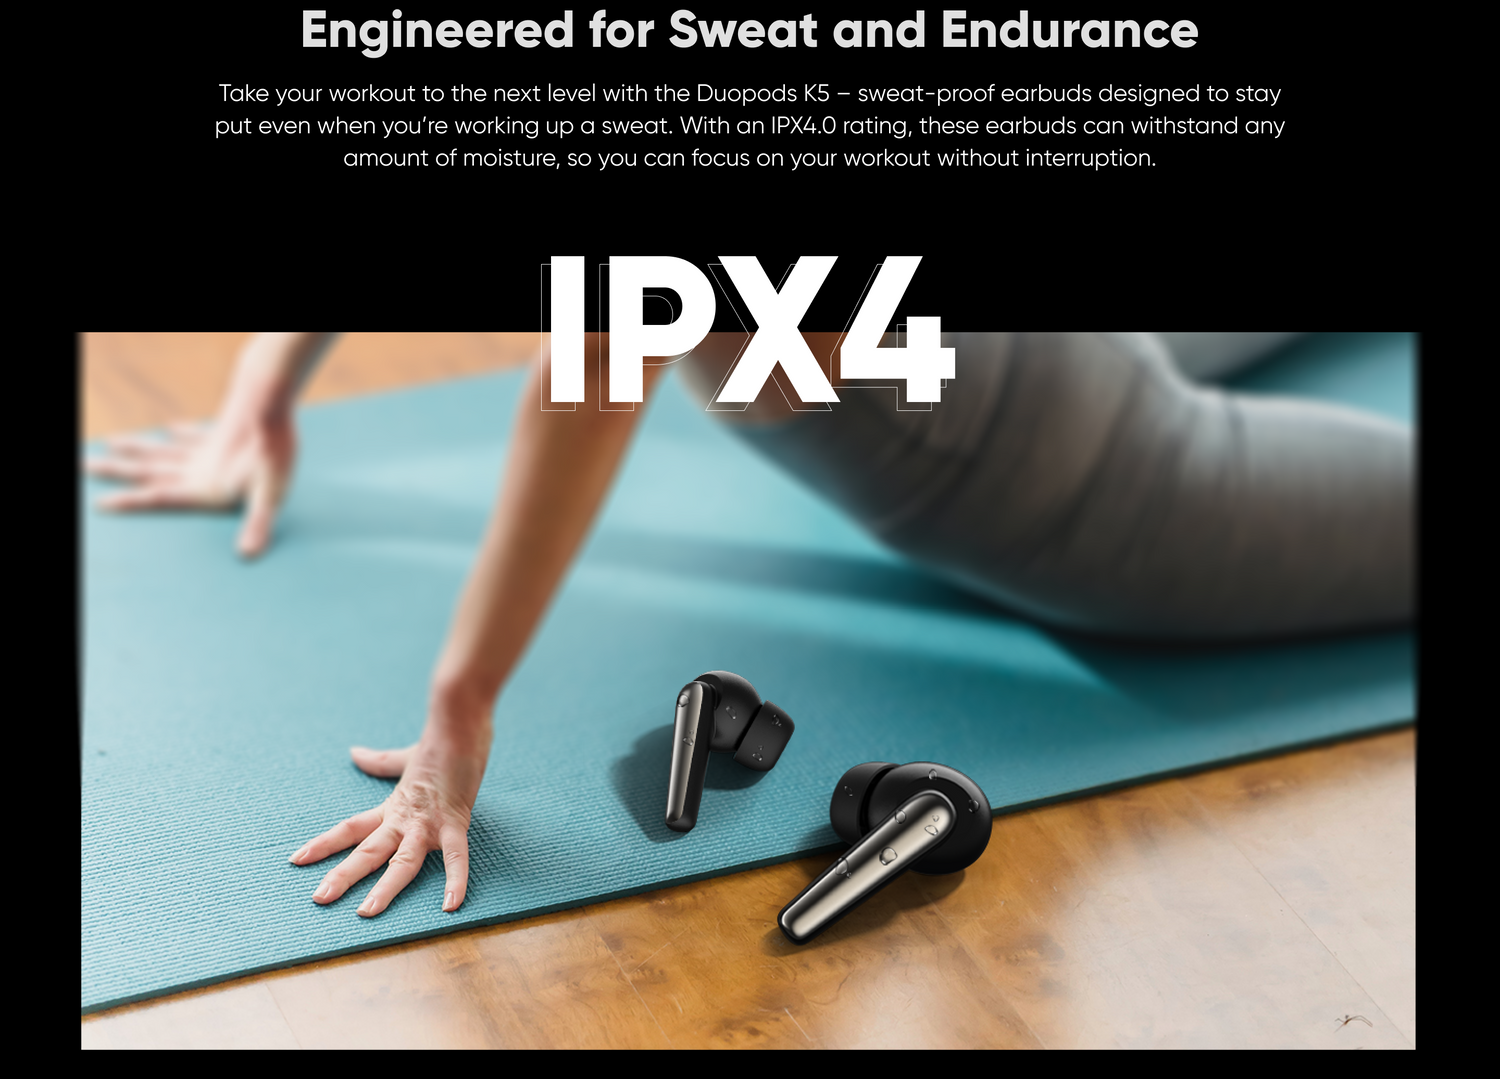 Engineered for Sweat and Endurance, 
Take your workout to the next level with the Duopods K5 — sweat-proof earbuds designed to stay
even when you're working up a sweat. With an IPX4.O rating, these earbuds can withstand any amount of moisture, so you can focus on your workout without interruption.